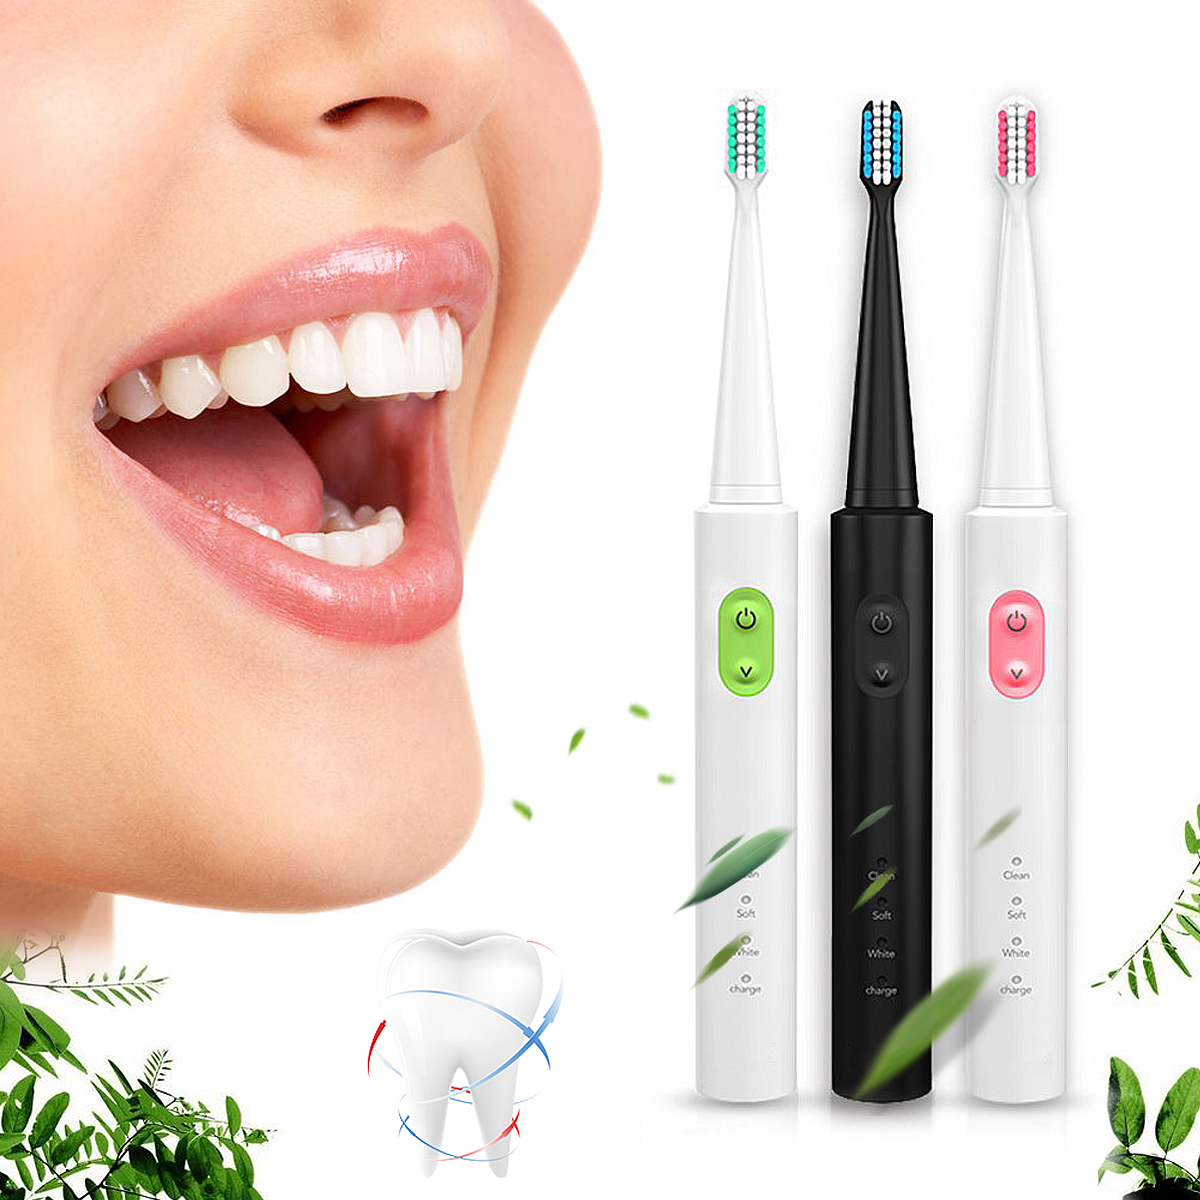 Travel-Rechargeable-Ultrasonic-Electric-Toothbrush-Waterproof-3-Cleaning-Mode-Teeth-Clean-4-Heads-1275782-1